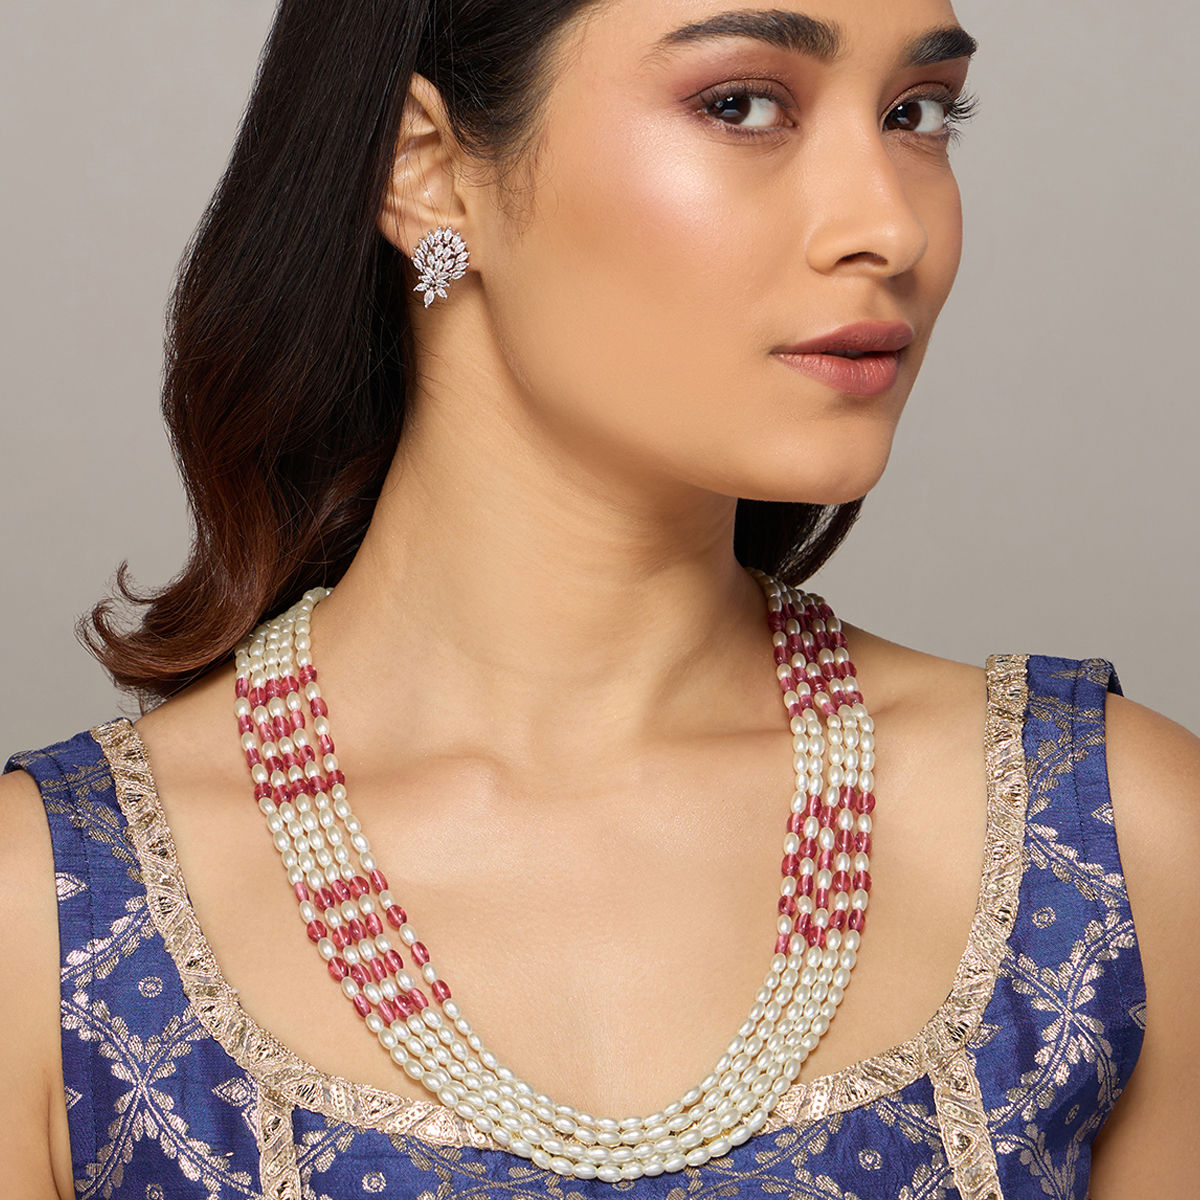 Jewellery Sets - Find Coordinated Earrings, Necklaces + More - Lovisa